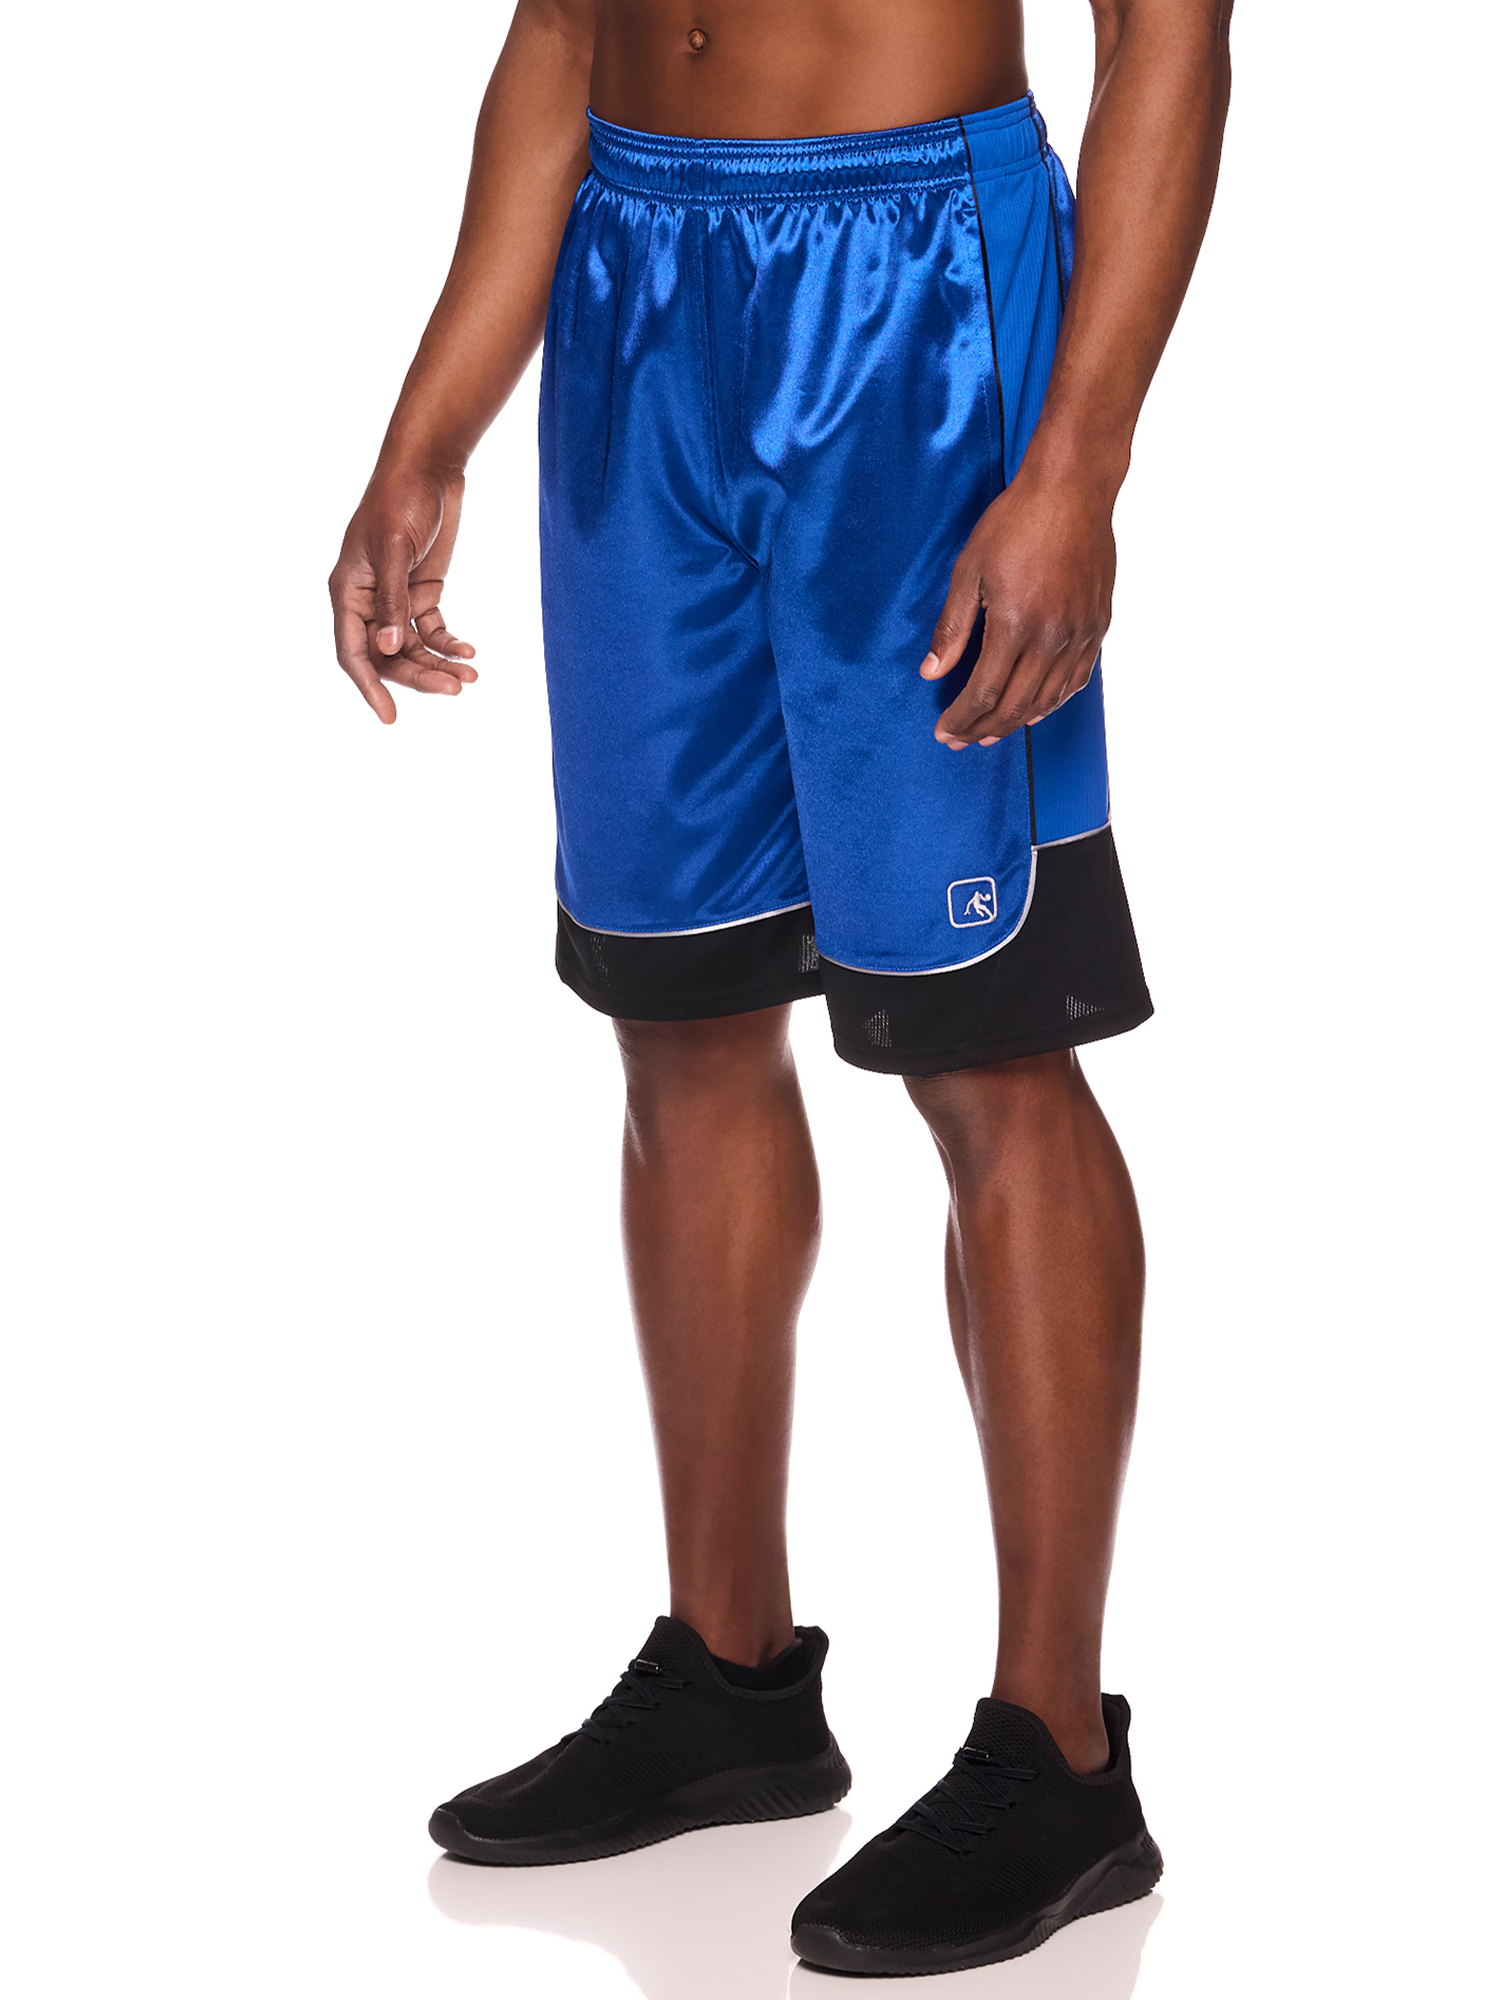 AND1 Men and Big Men's All Court Colorblock 11" Shorts, up to Size 3XL - image 3 of 5